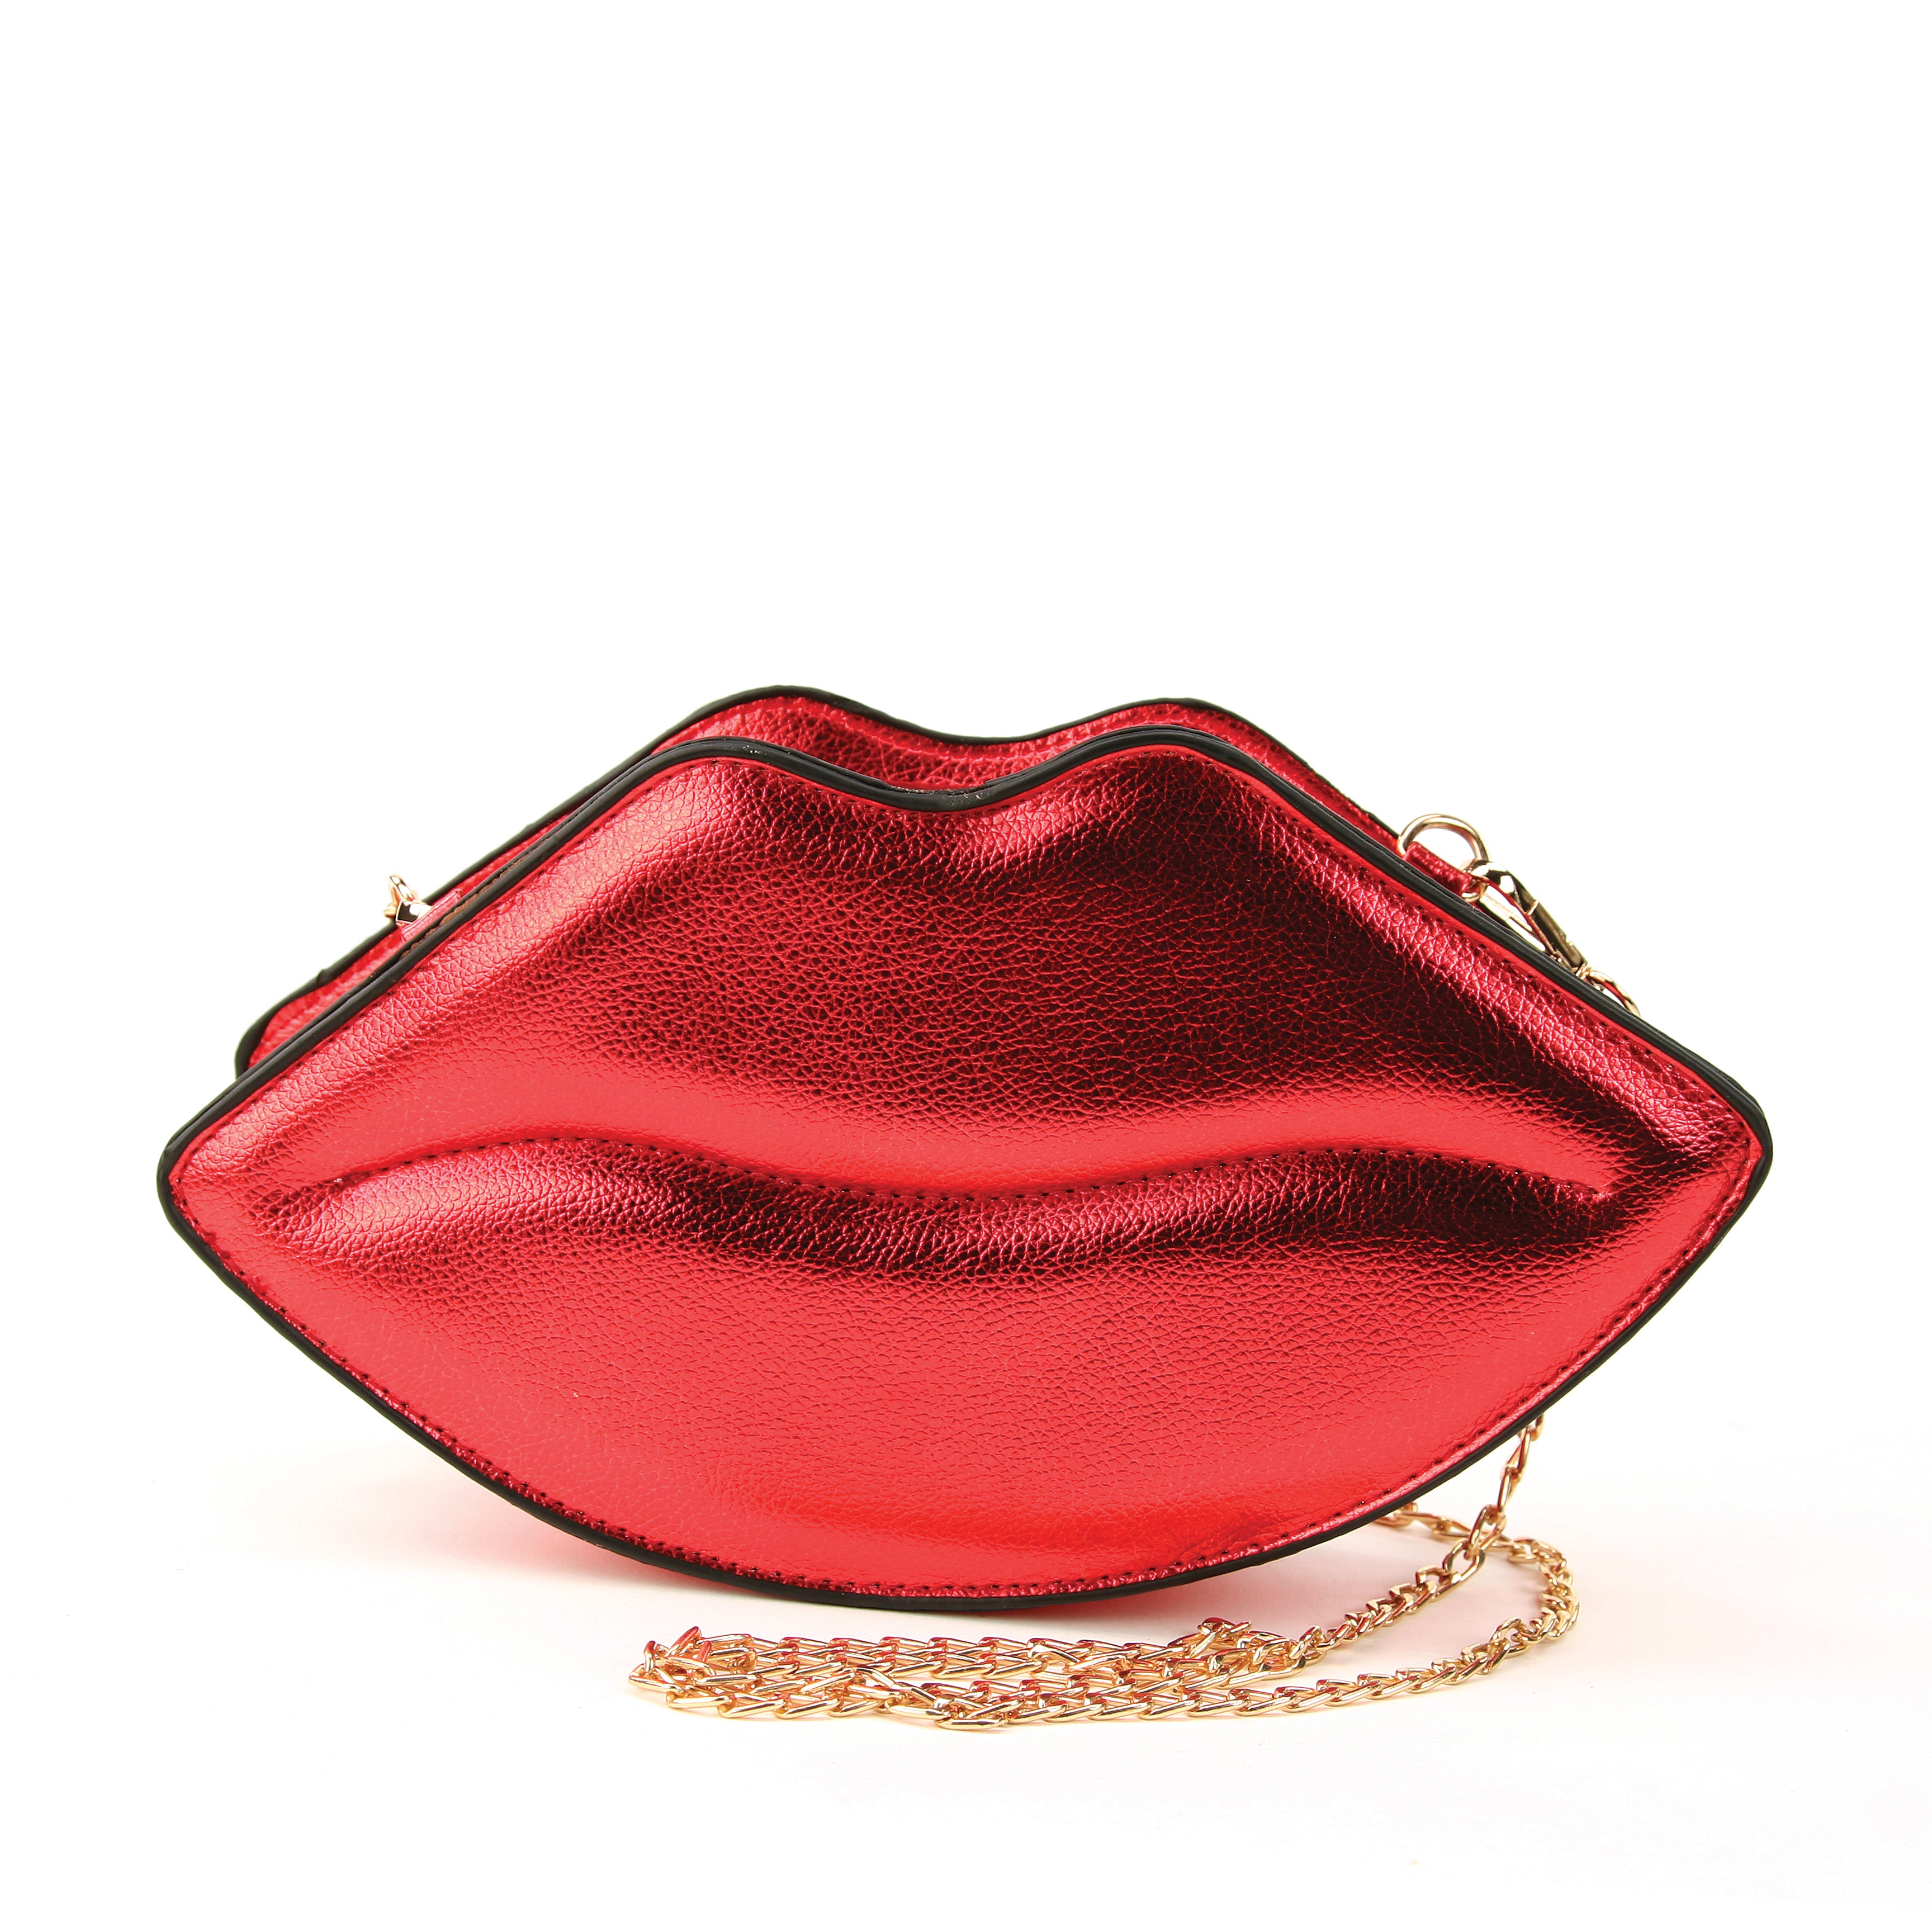 Sleepyville Critters - Shining Lips Cross Body Bag n Vinyl Material, red color, front view